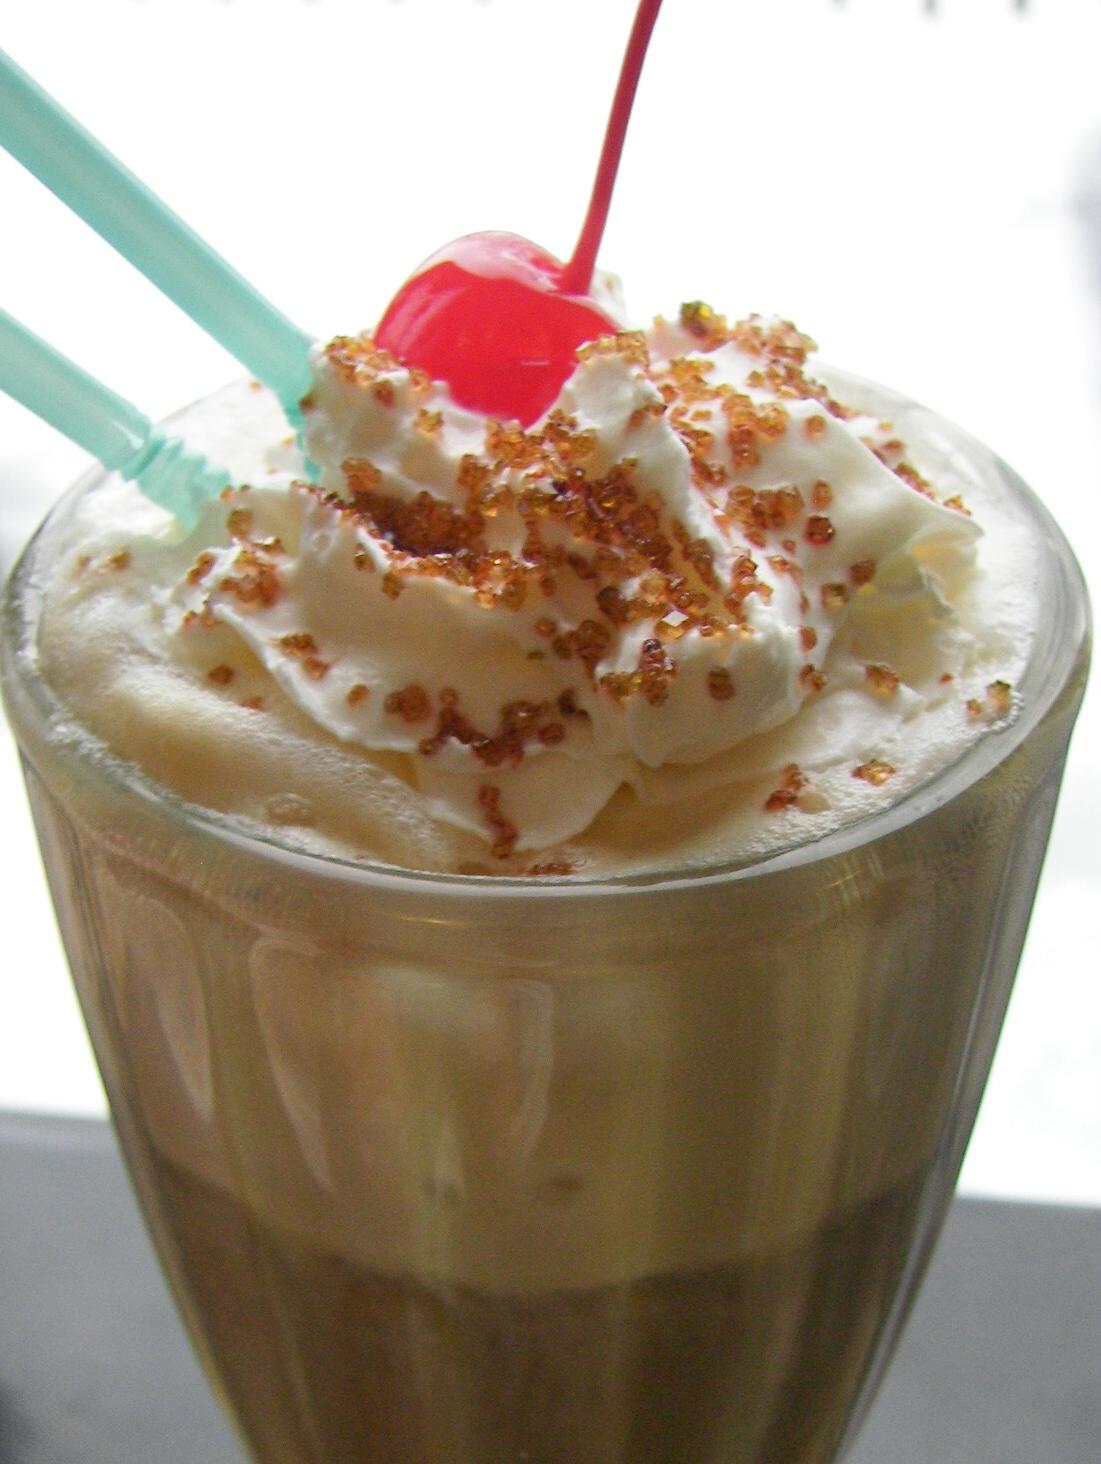  Get ready to cool off with a Coffee Ice Cream Soda!